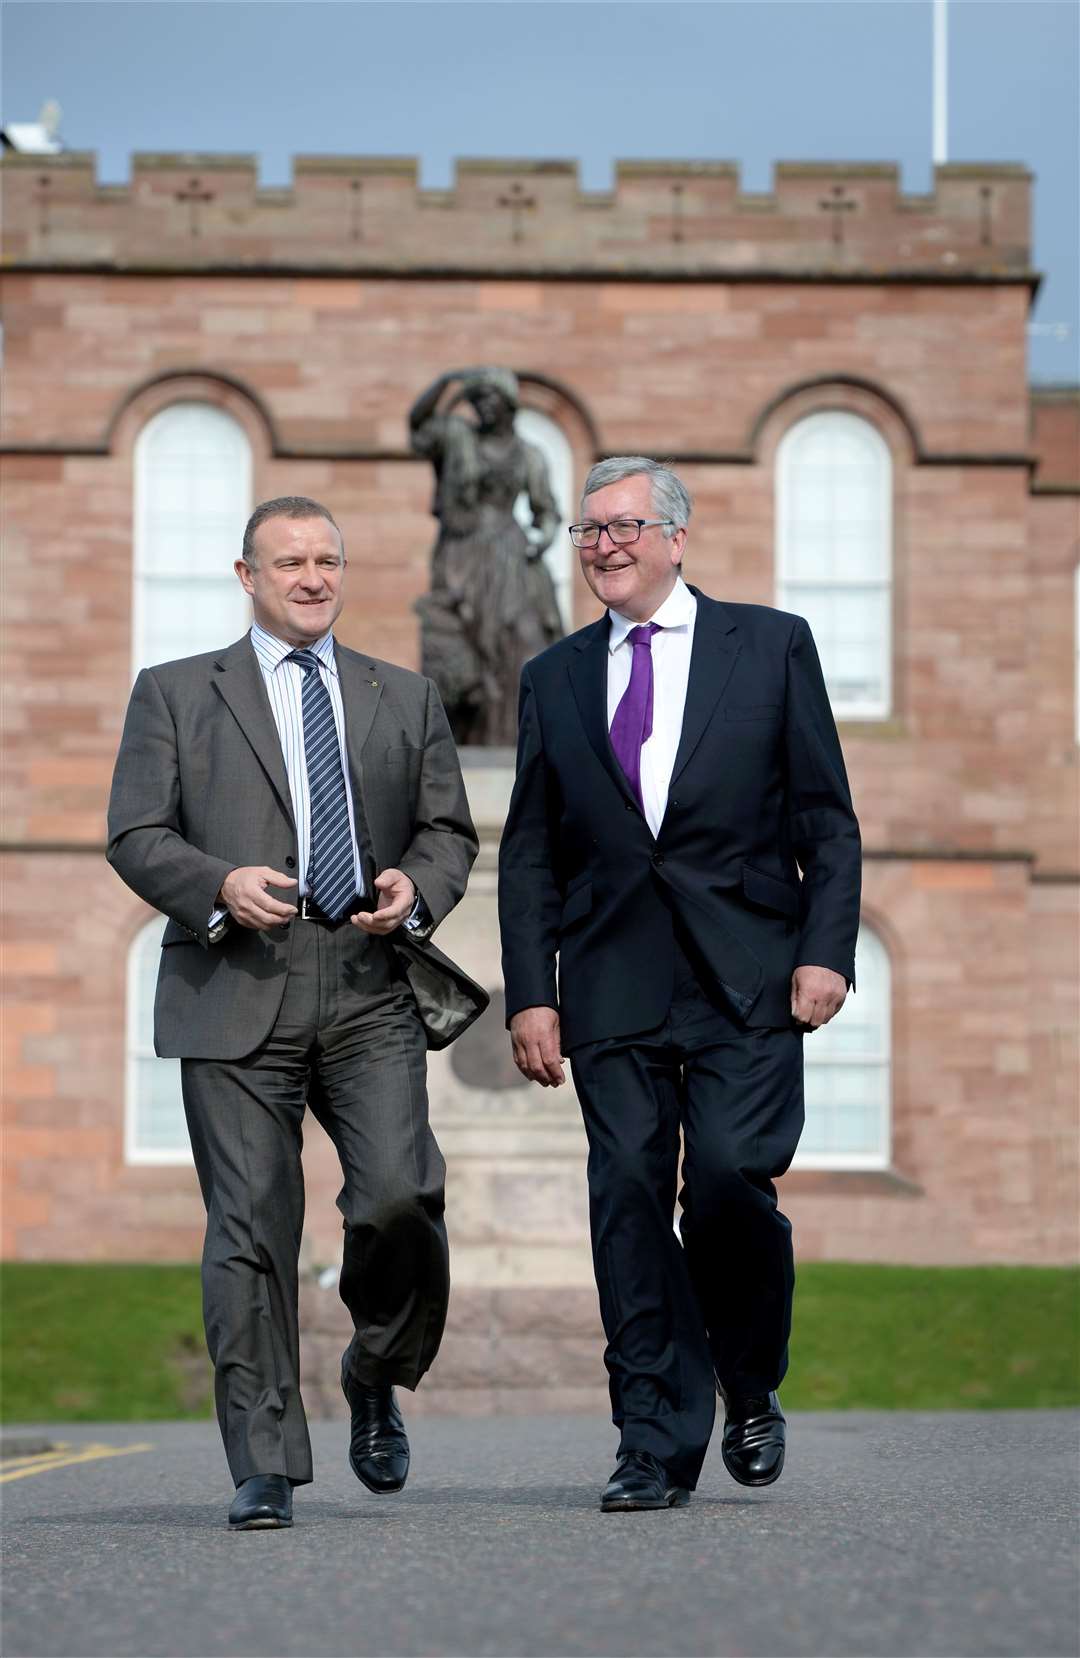 Flashback to a meeting between Drew Hendry and Fergus Ewing outside Inverness Castle a few years ago.